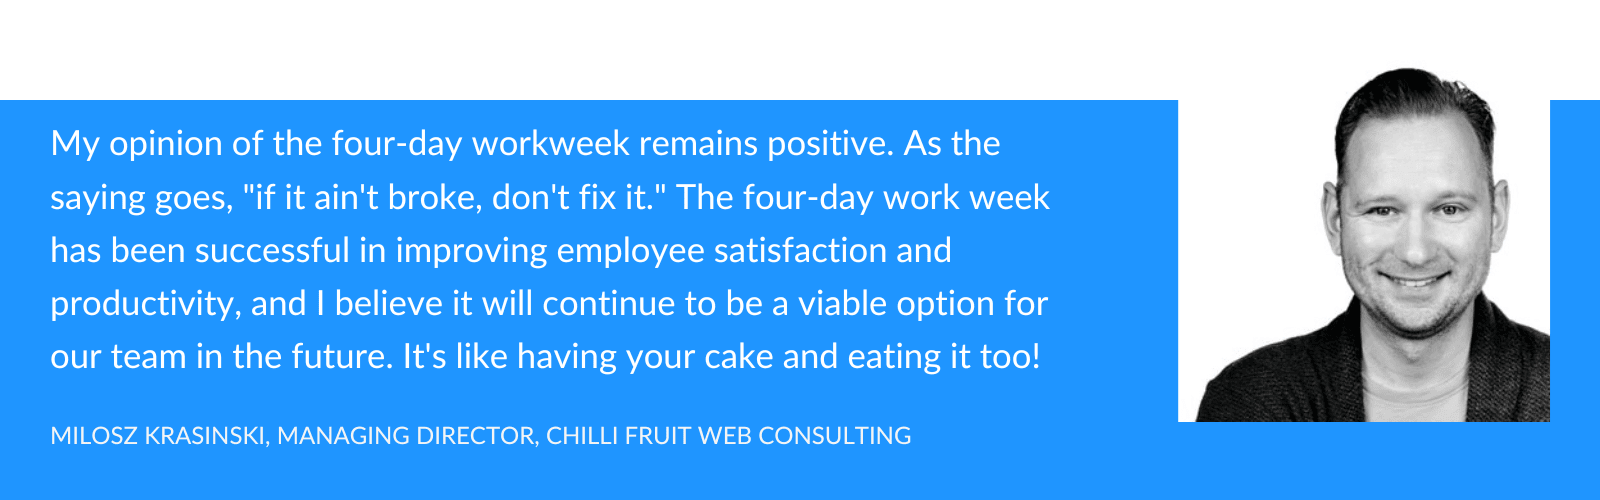 My opinion on the four-day workweek remains positive. As the saying goes, "if it ain't broke, don't fix it." The four-day work week has been successful in improving employee satisfaction and productivity, and I believe it will continue to be a viable option for our team in the future. It's like having your cake and eating it too!


- Milosz Krasinski
Managing Director
Chilli Fruit Web Consulting